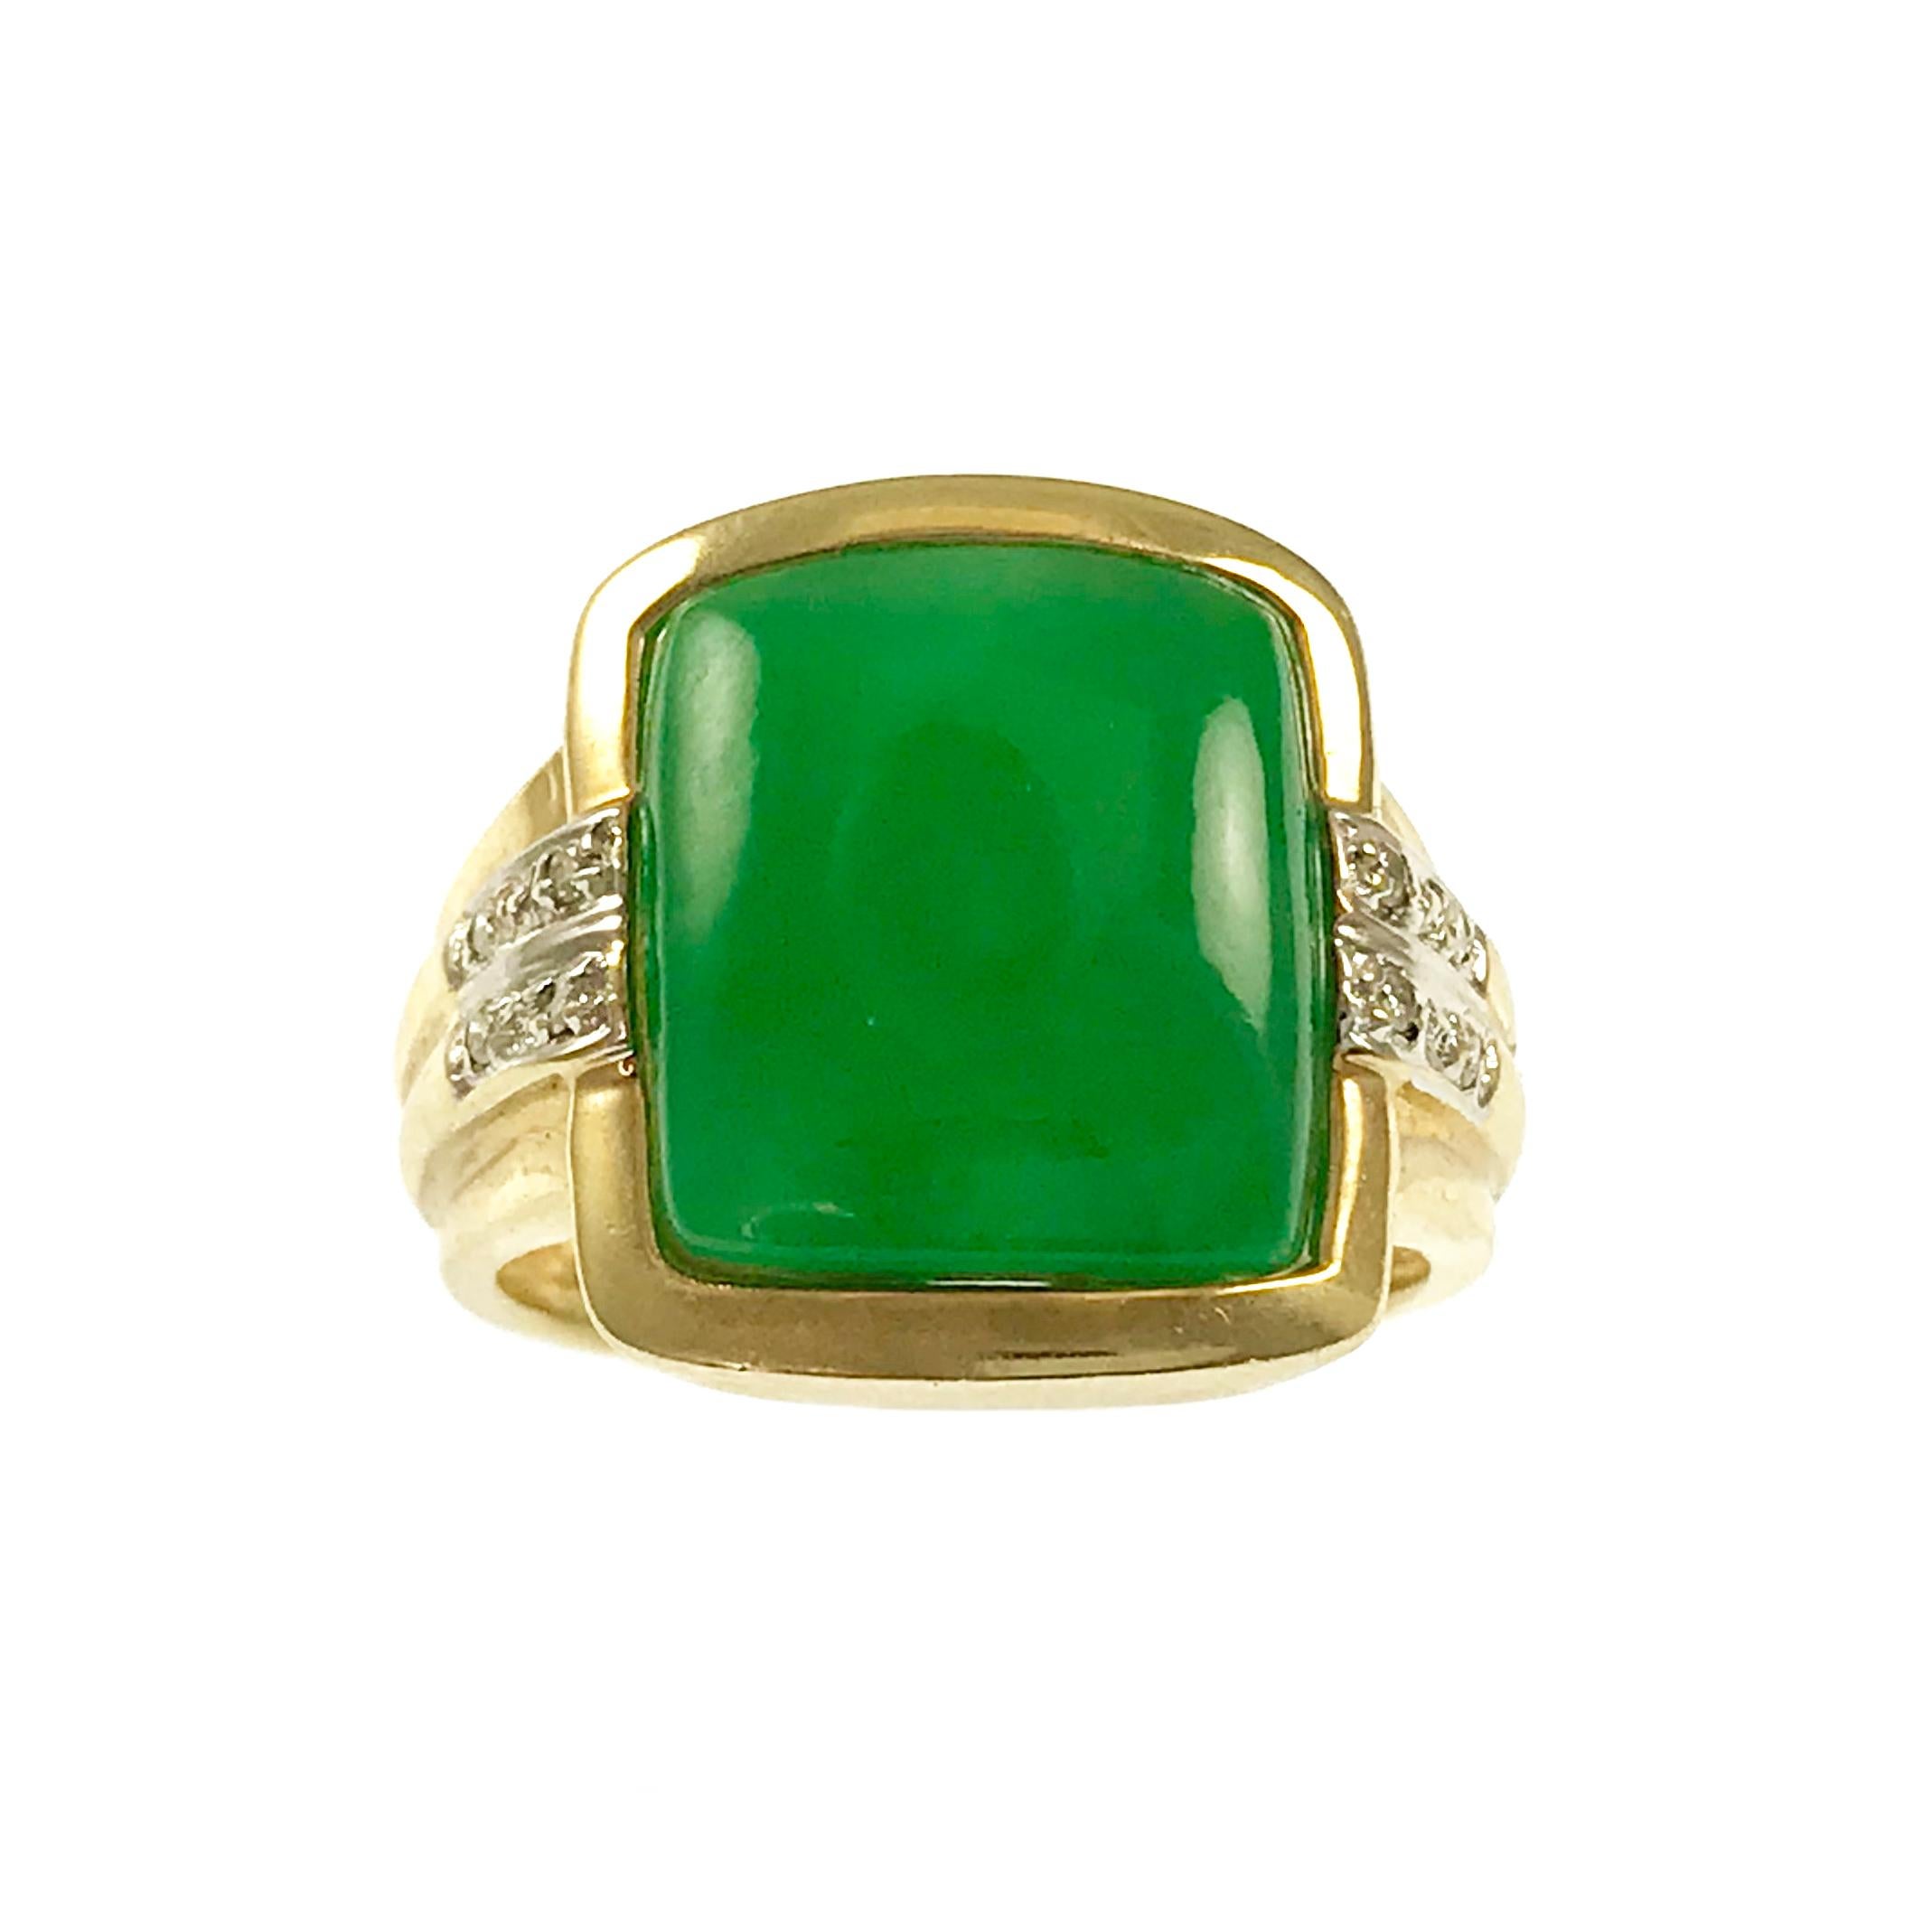 14 Karat Green Jade Diamond Ring. Elegant retro-style Jade ring with Melee side diamonds set in 14 Karat white gold. The ring is size 7 1/4 and the total weight of the ring is 7.5 grams.